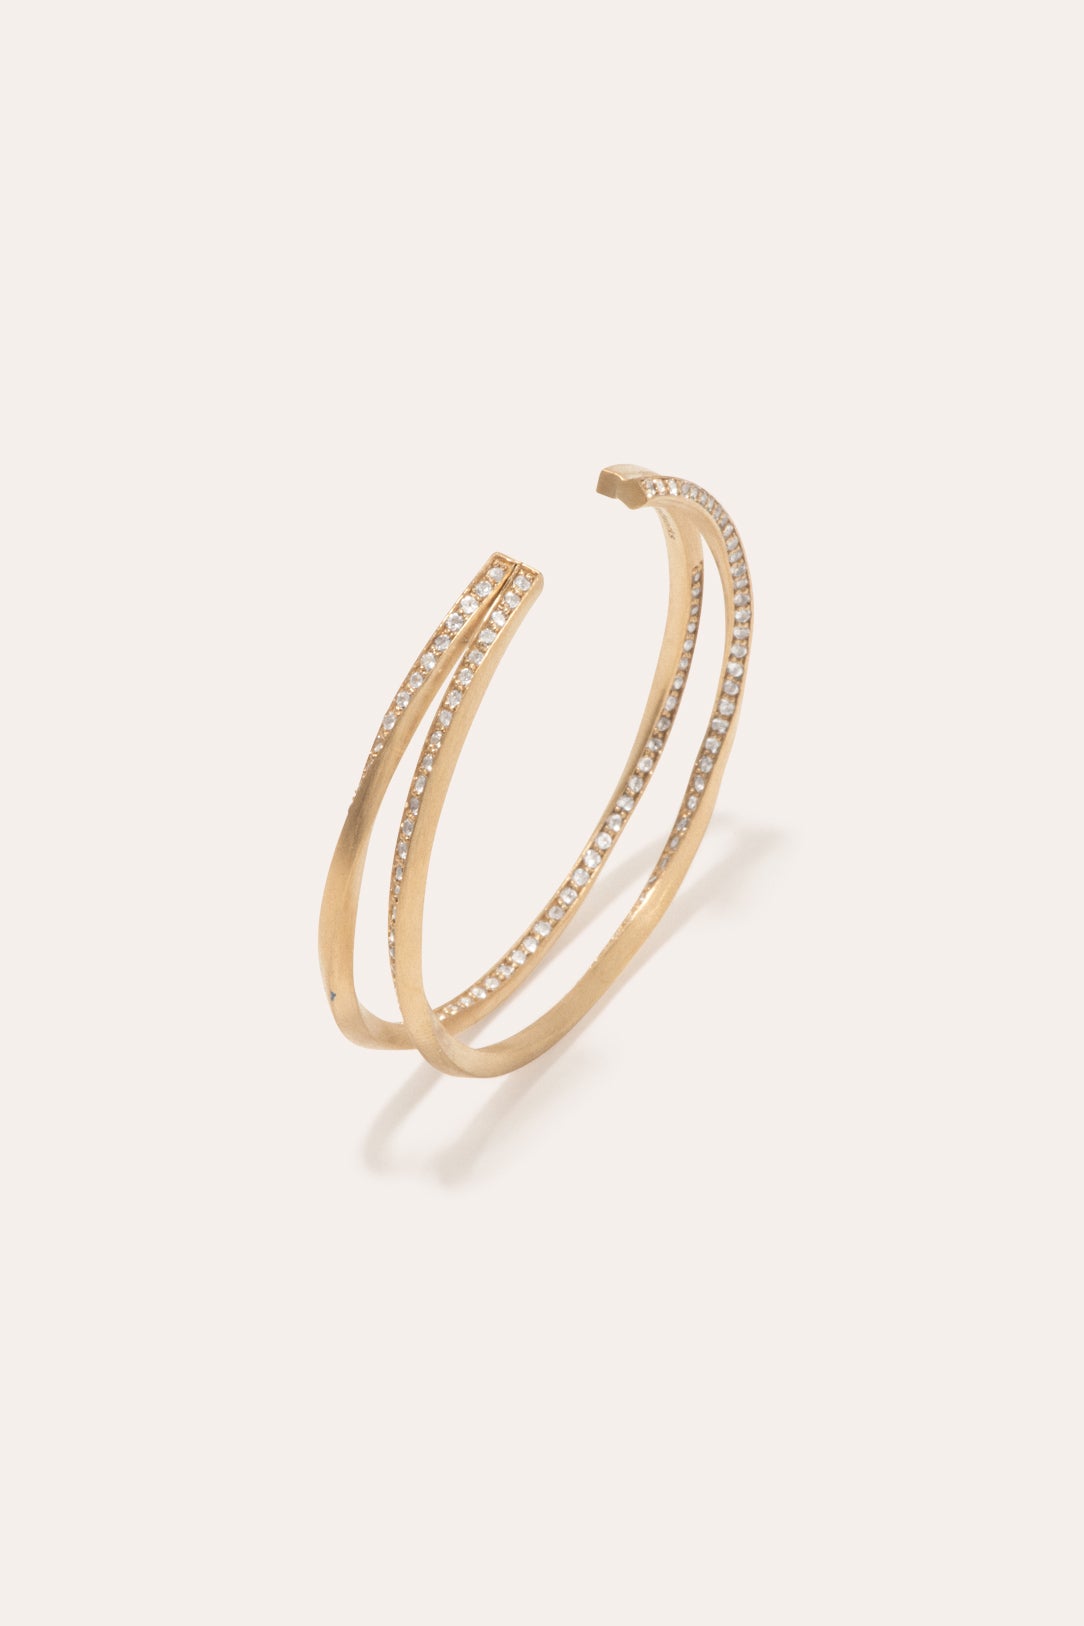 Domain - White Topaz and Gold Vermeil Hoop Ear Cuff | Completedworks